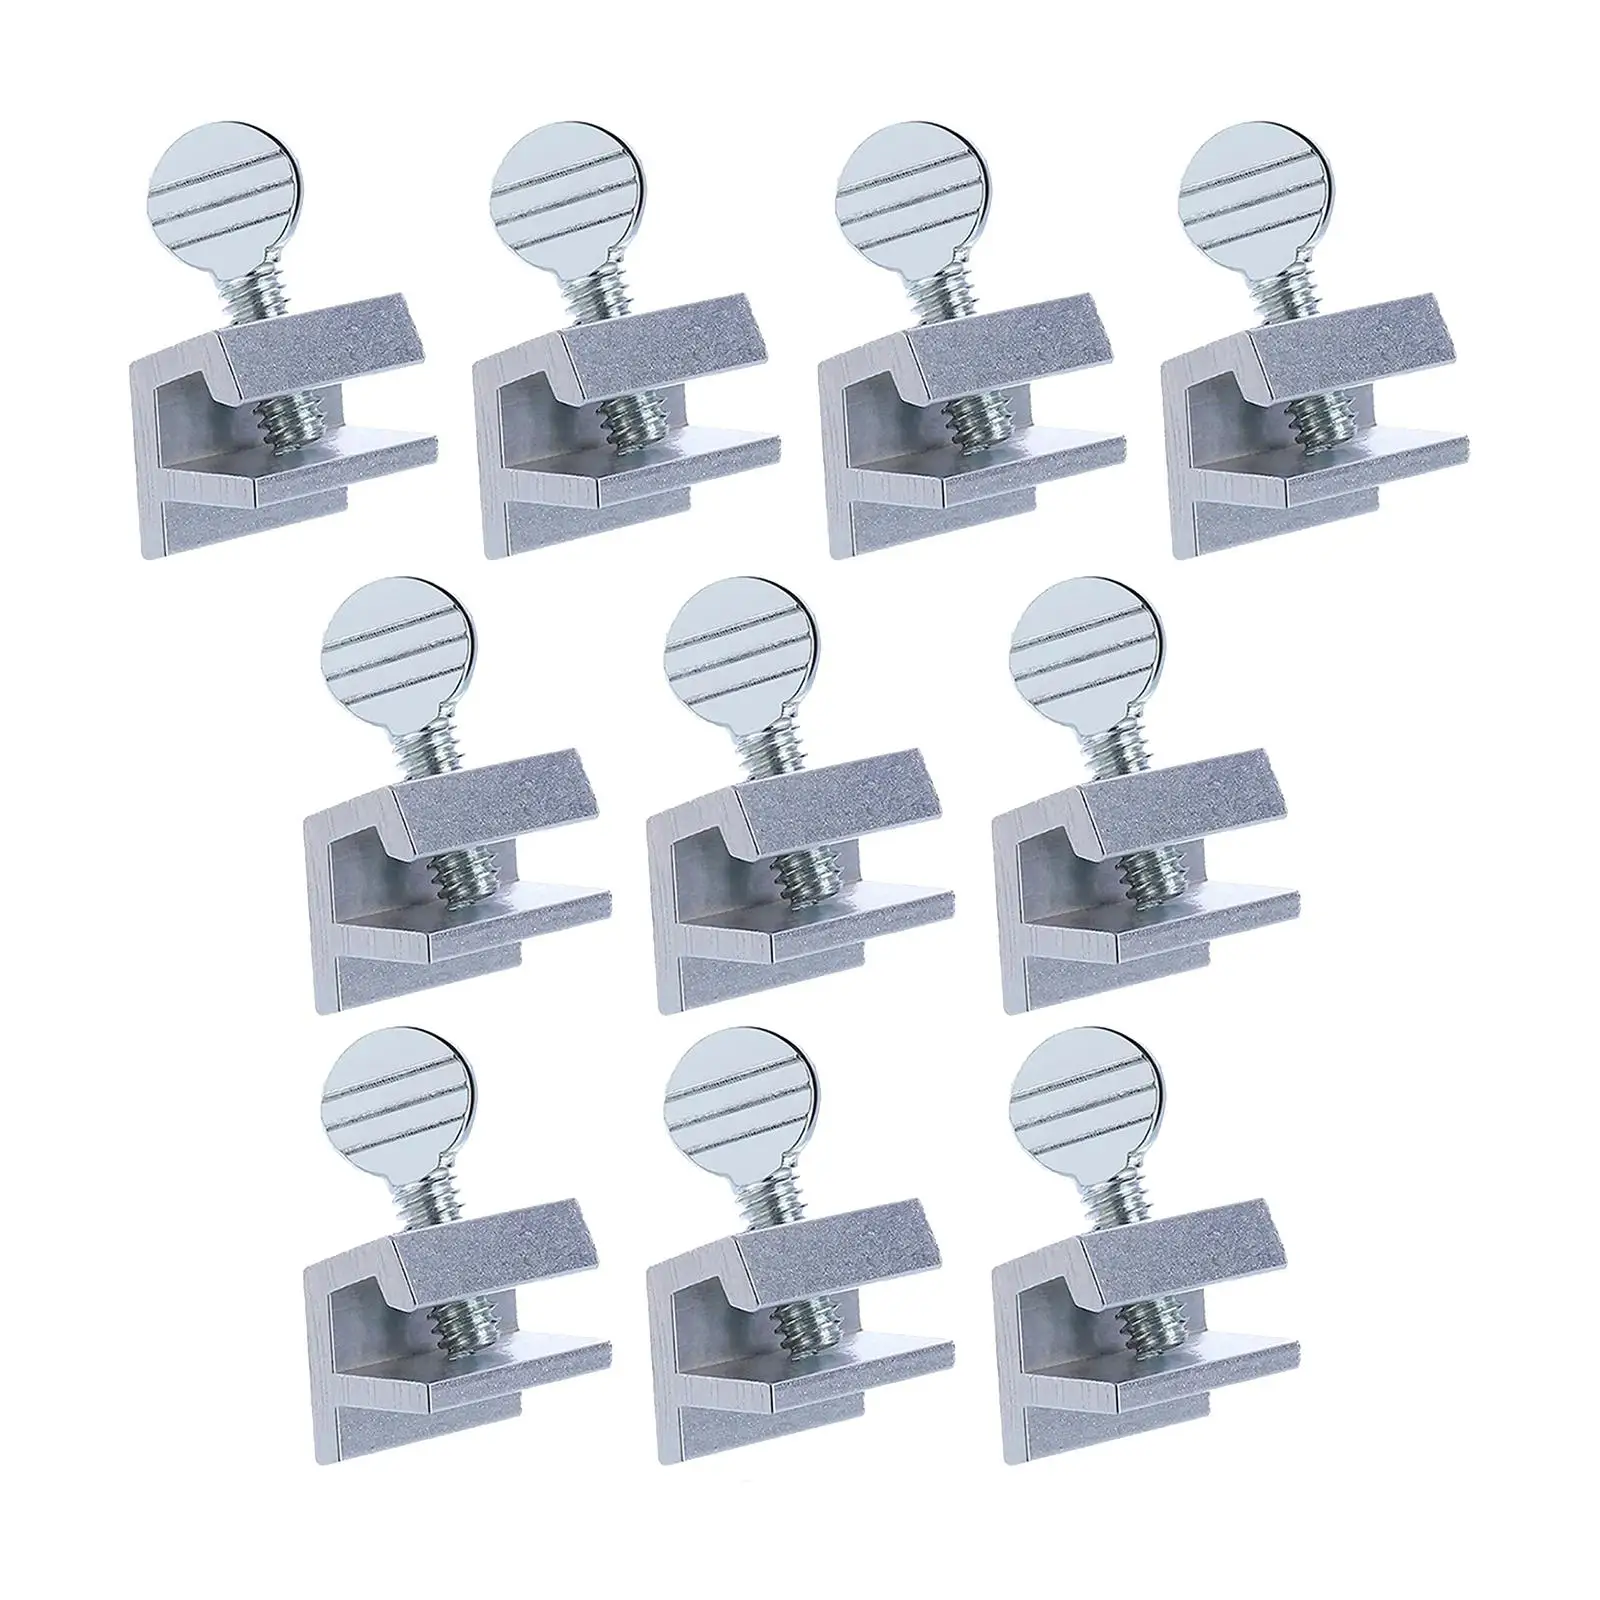 10Pcs Sliding Door Window Locks Punch Free Easy to Install Detachable Safety Portable for Cabinet Bathroom Office Home Door